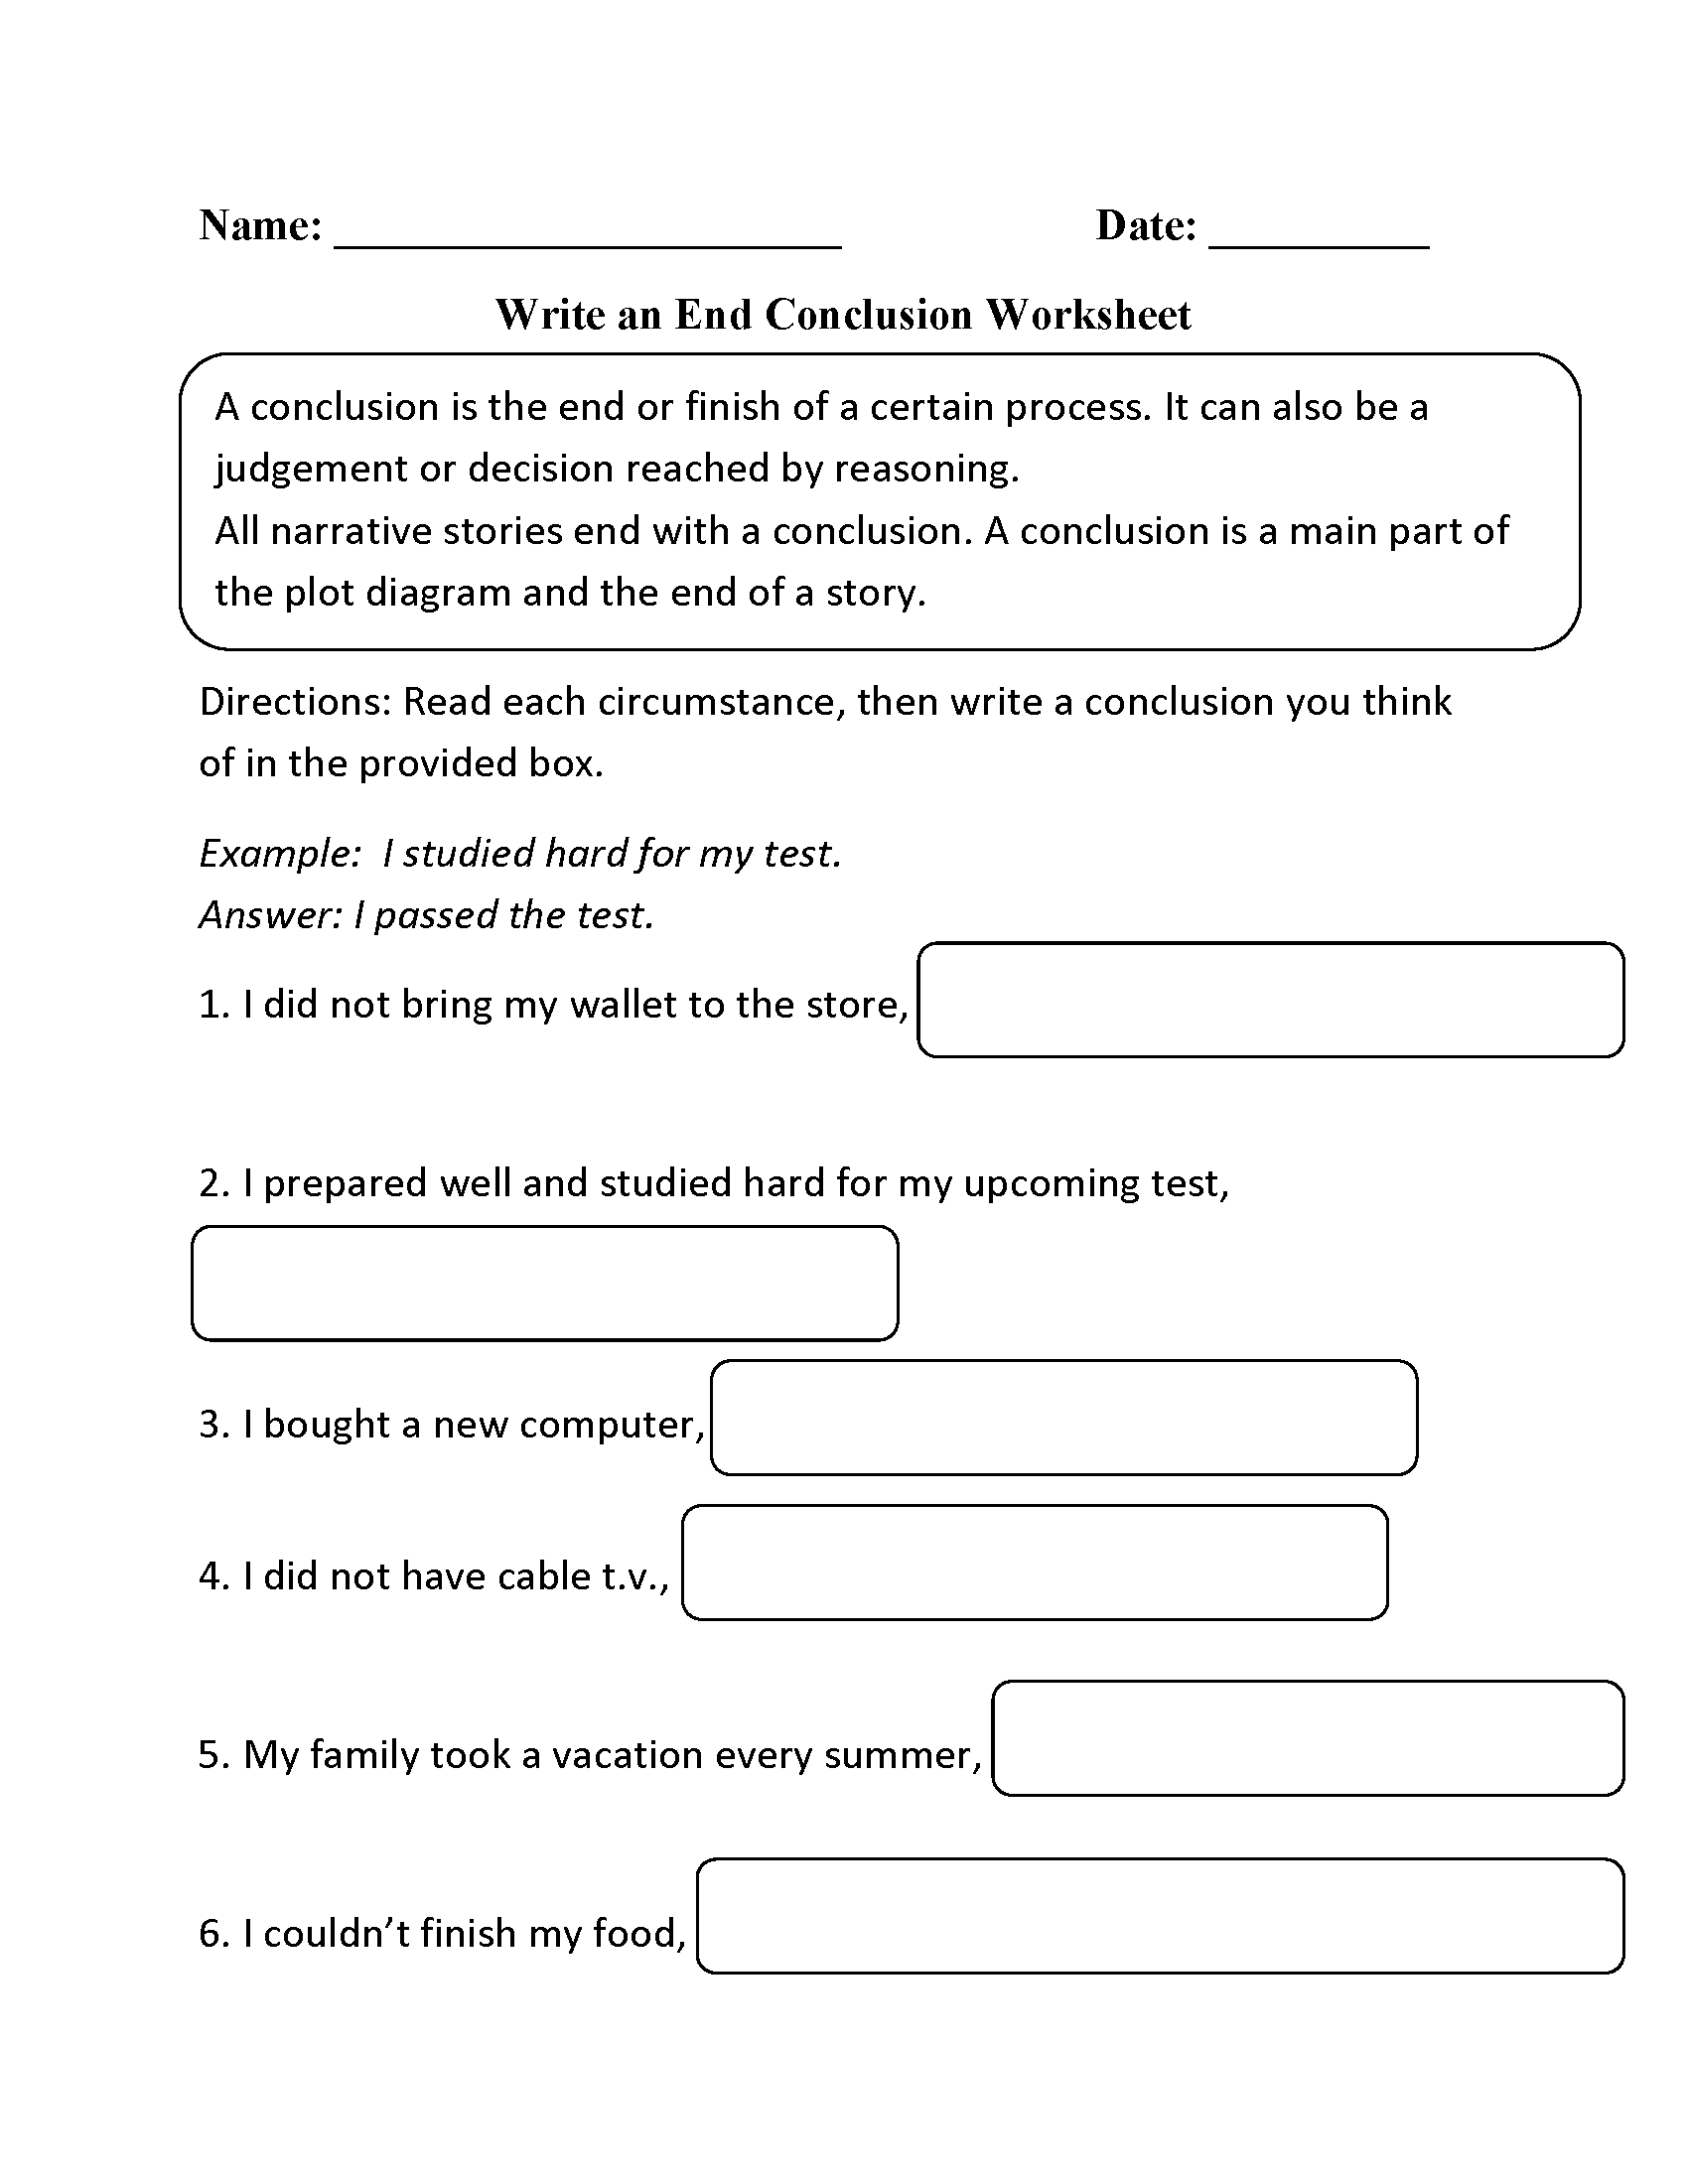 drawing-conclusions-worksheets-with-answers-pdf-thekidsworksheet